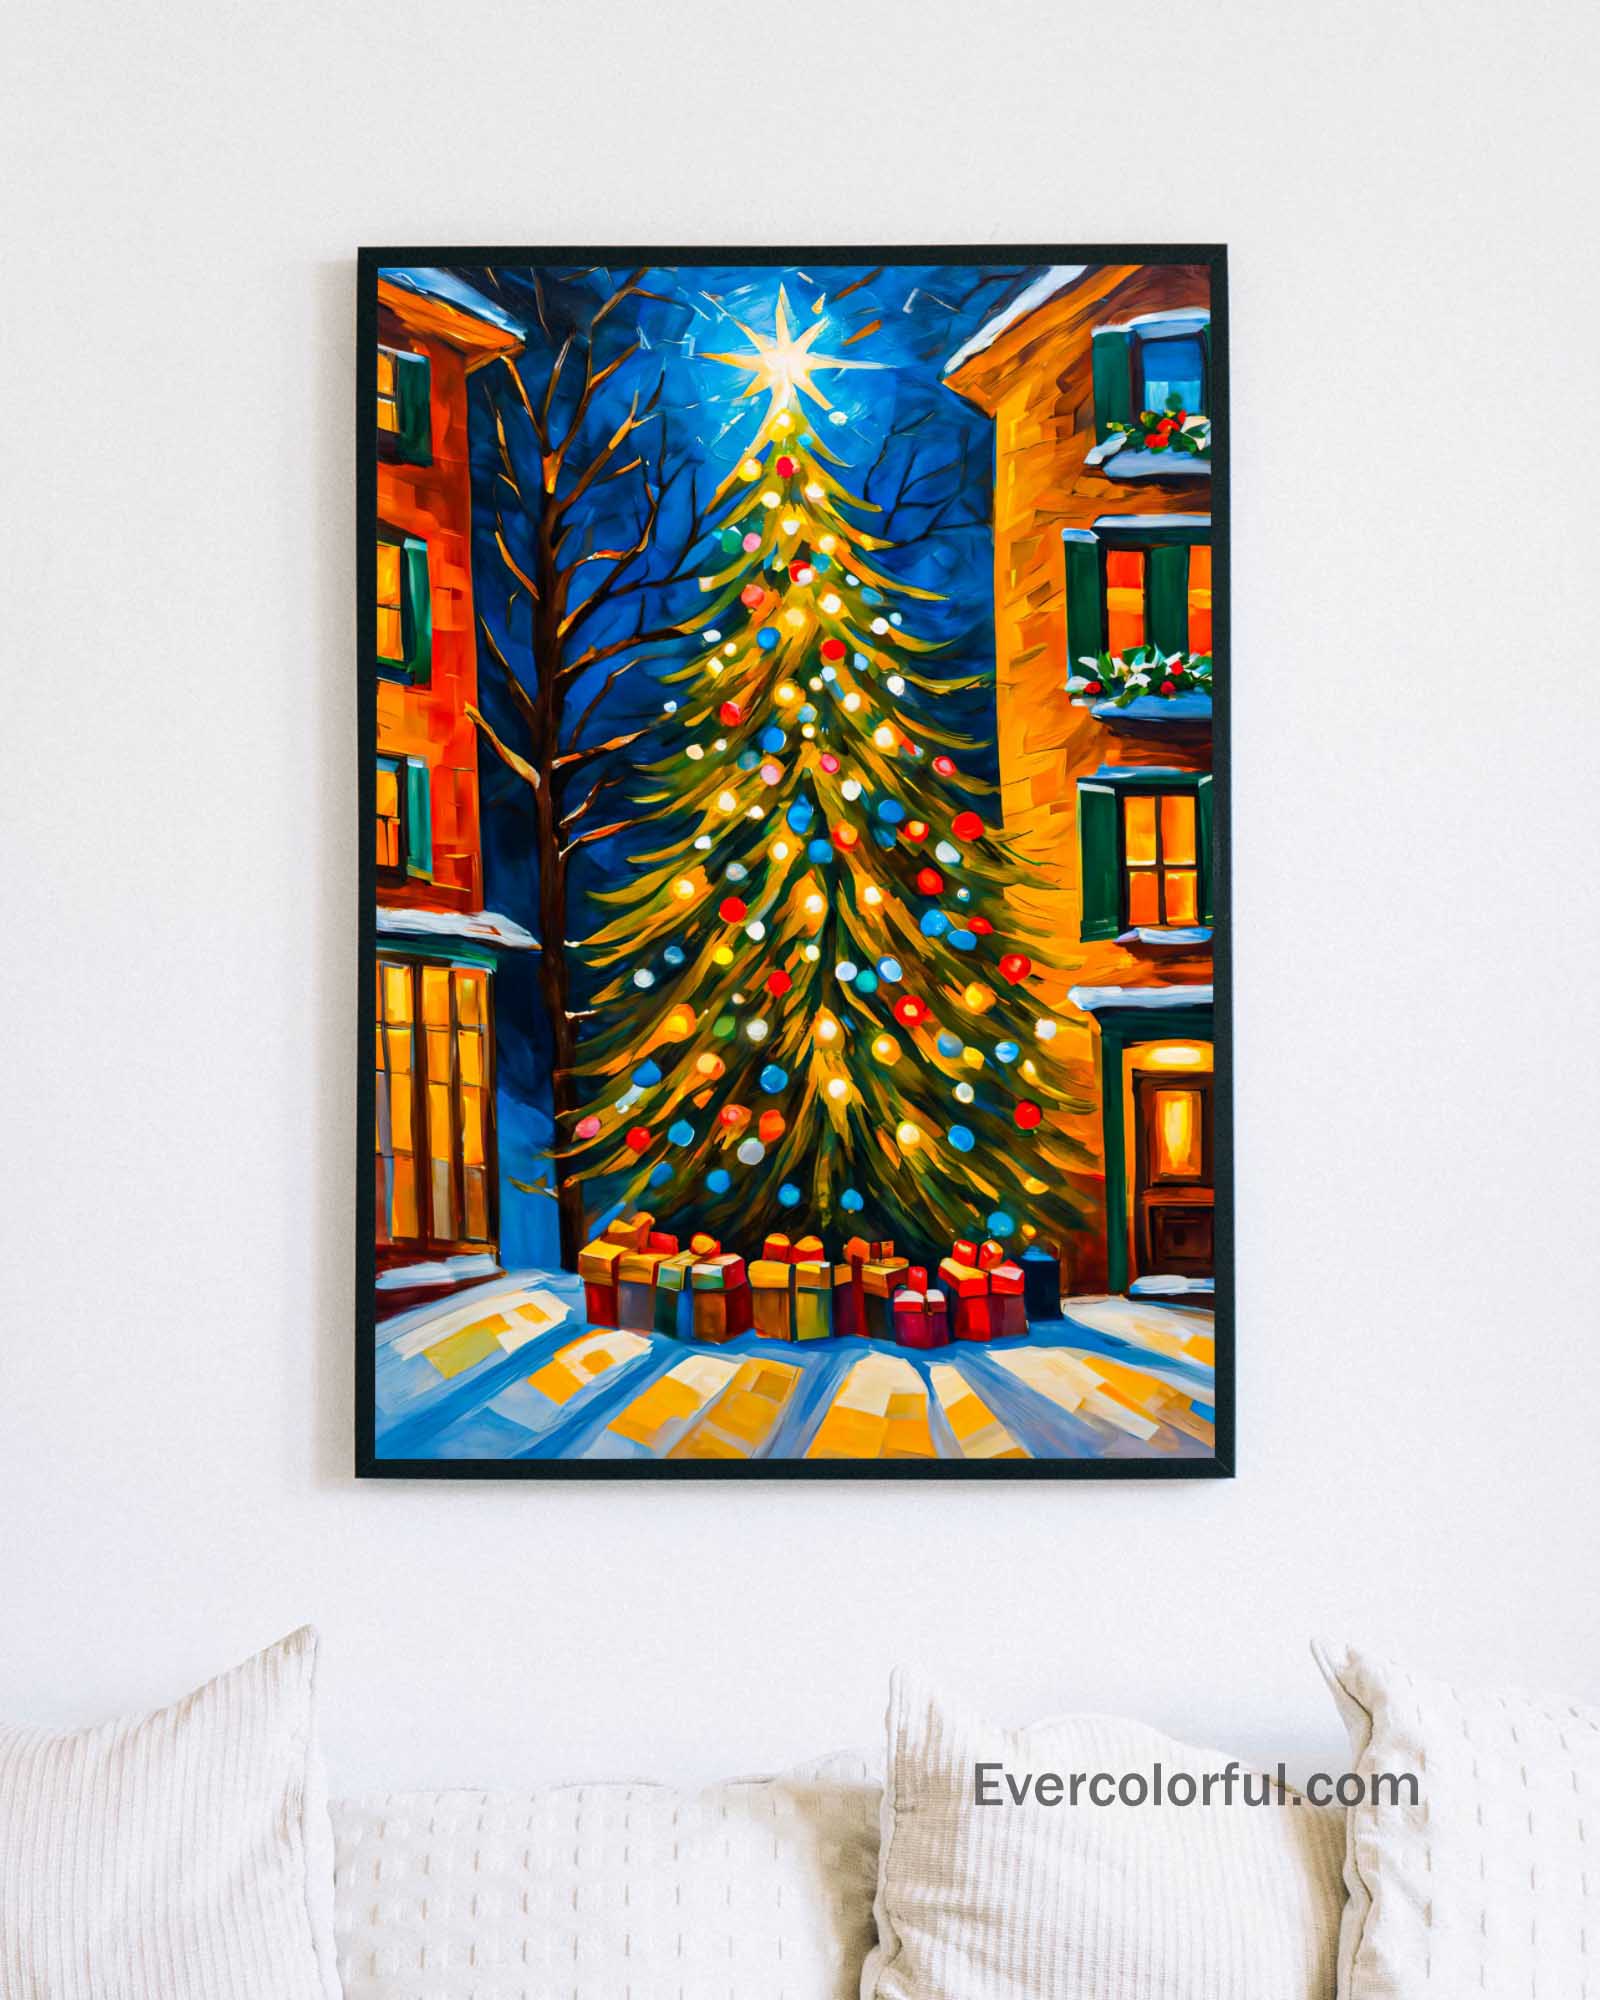 Night before christmas - Poster - Ever colorful